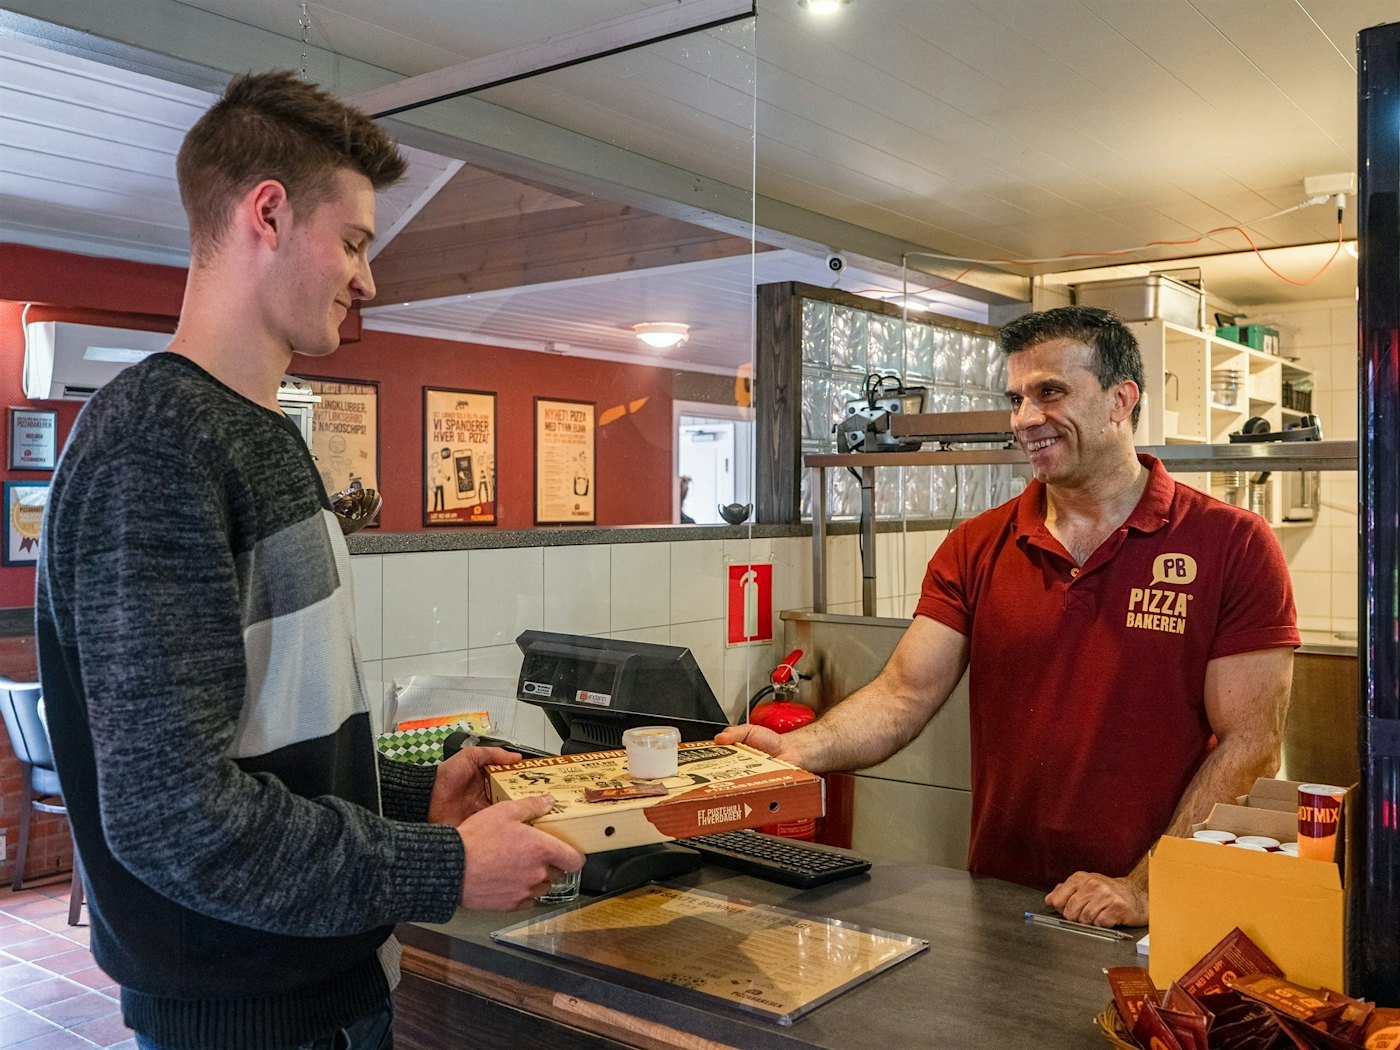 Waiter delivers takeout pizza to customer. Photo